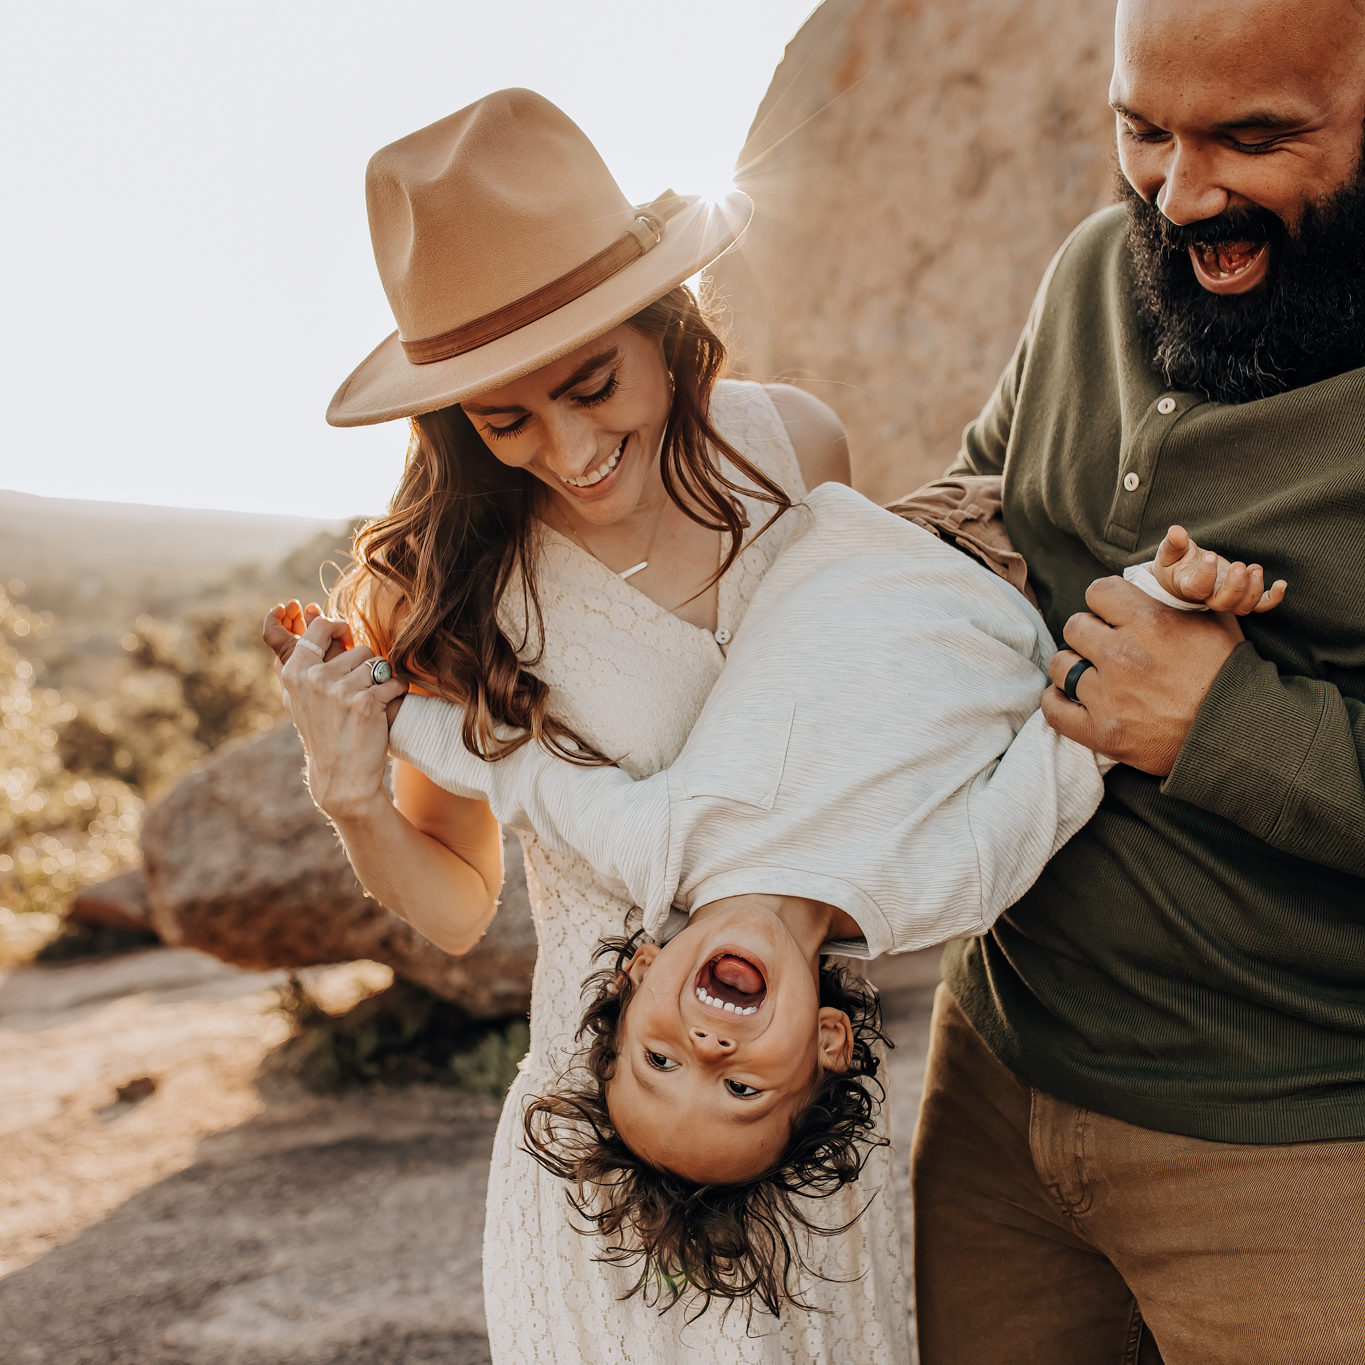 Family photography session at Enchanted Rock State Natural Area with a mom and dad holding a son upside down playfully, while the boy is laughing.